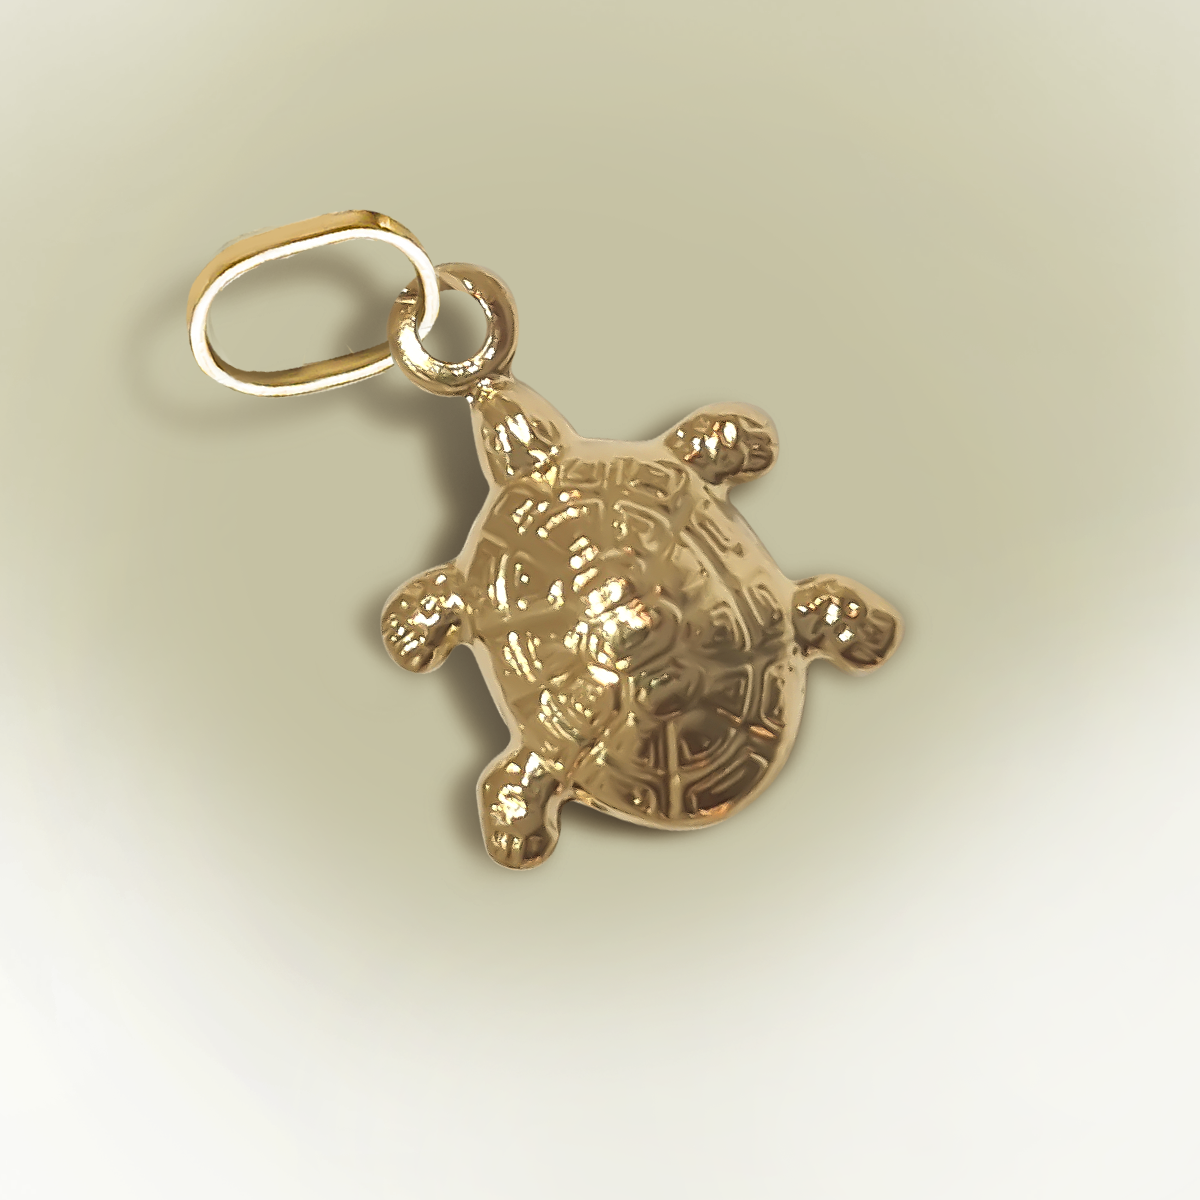 13mm Turtle Charm 9ct Yellow Gold